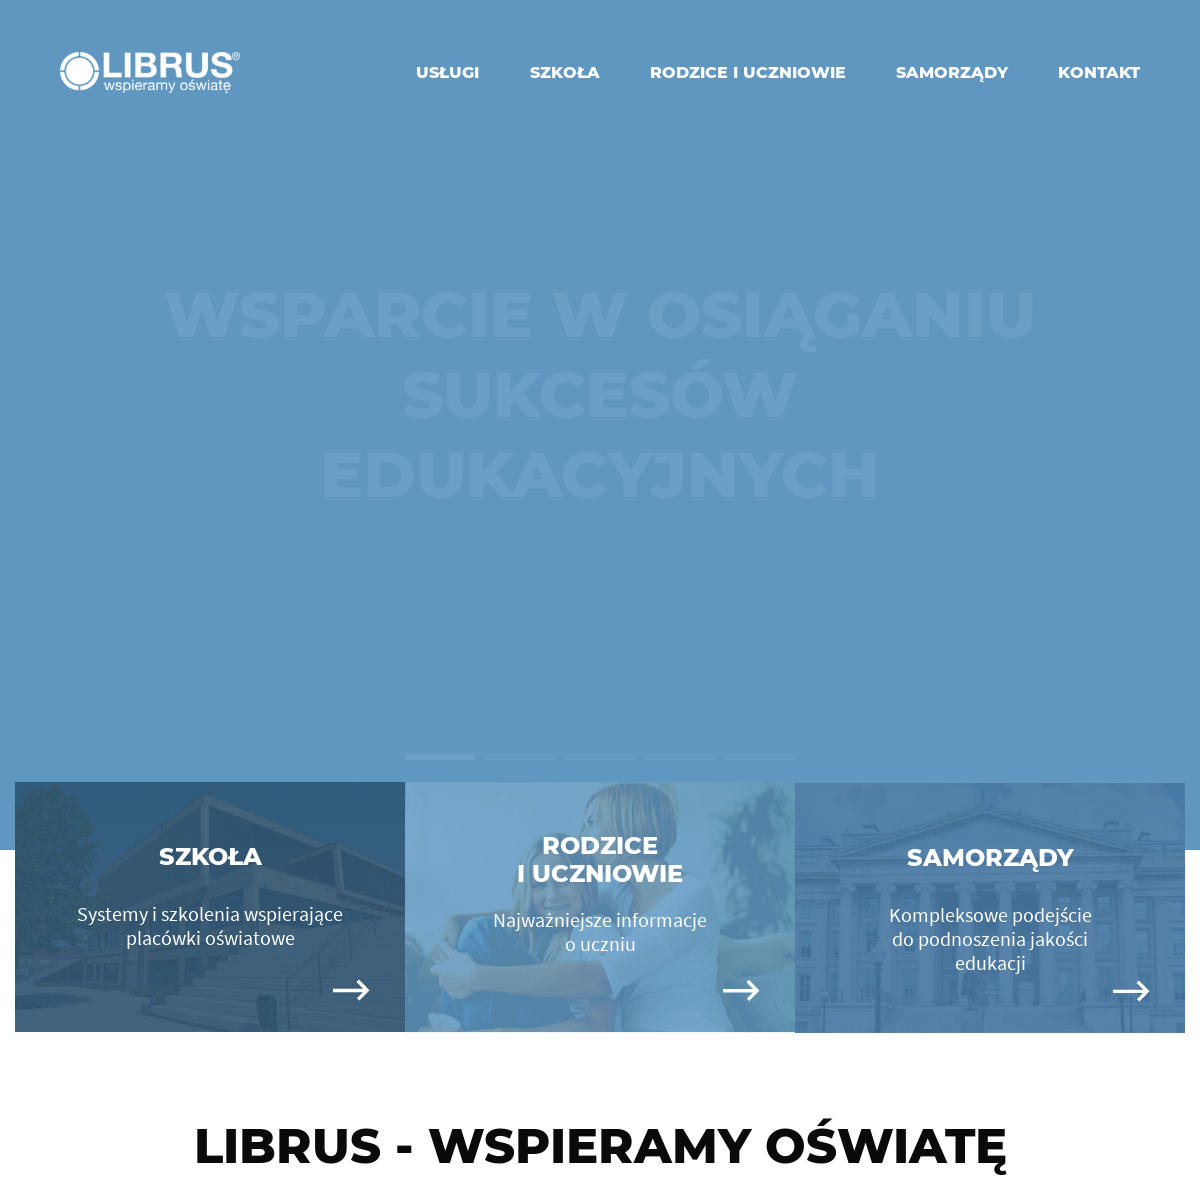 A complete backup of librus.pl